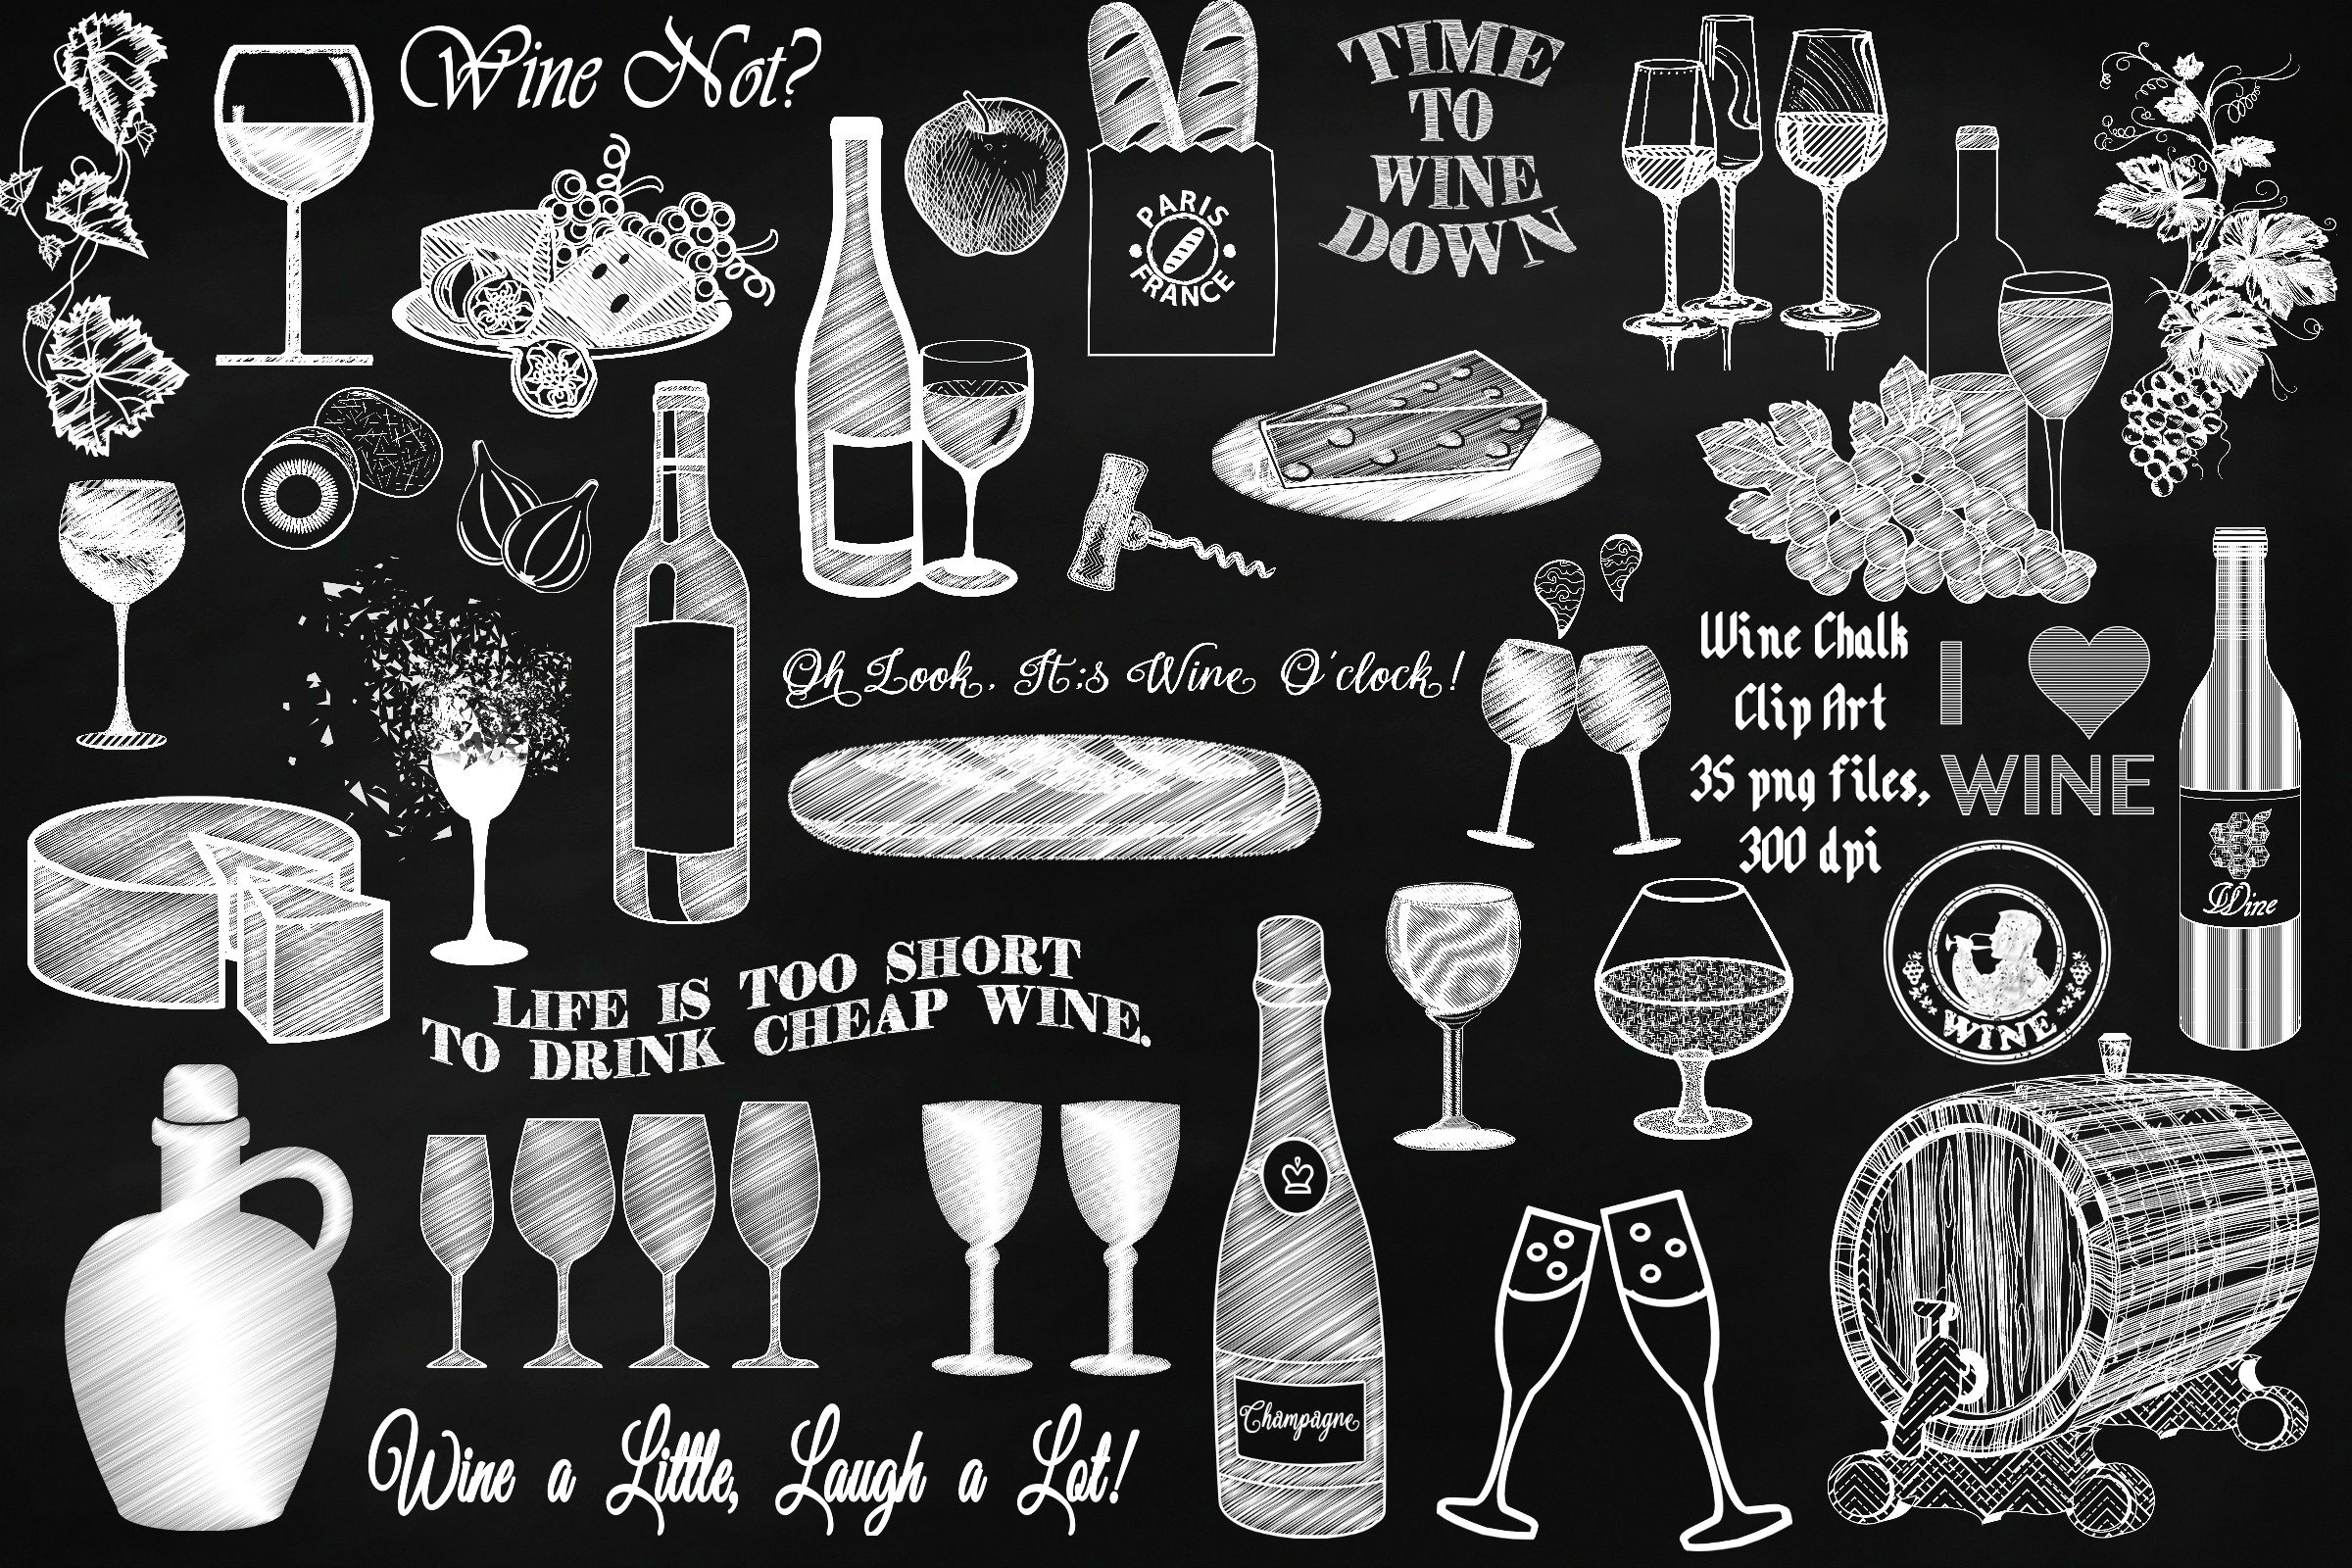 Chalk Wine & Cheese Clip Art cover image.